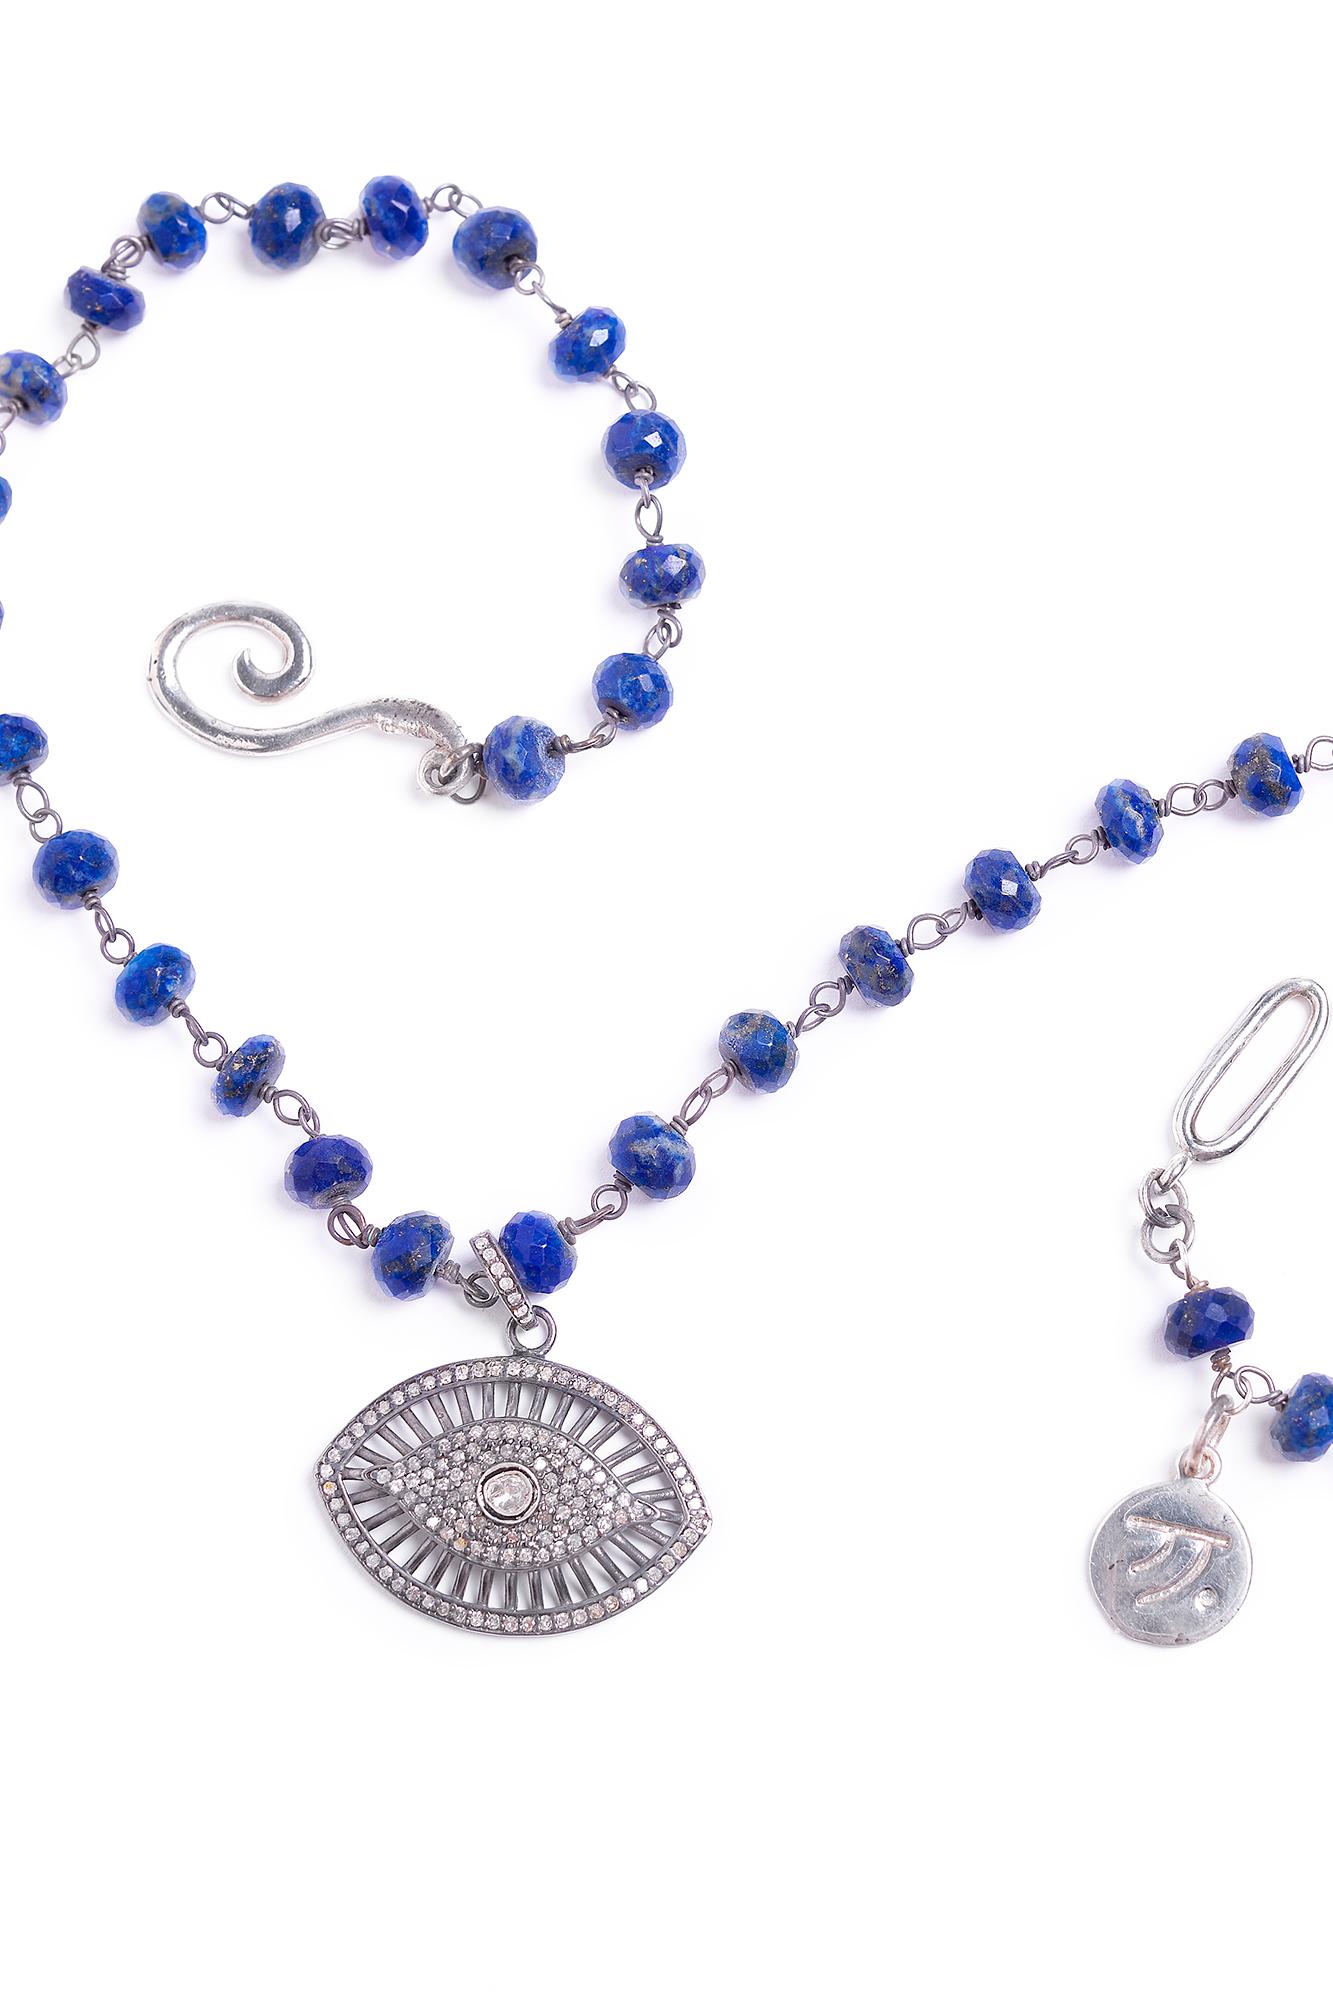 Properties
Evil Eye is a prominent symbol in the Moroccan culture.  The necklace is adorned with rich deep blue lapis.  The necklace is accented with a brilliant pave diamond evil eye.

Properties
The stones represent protective and mystic